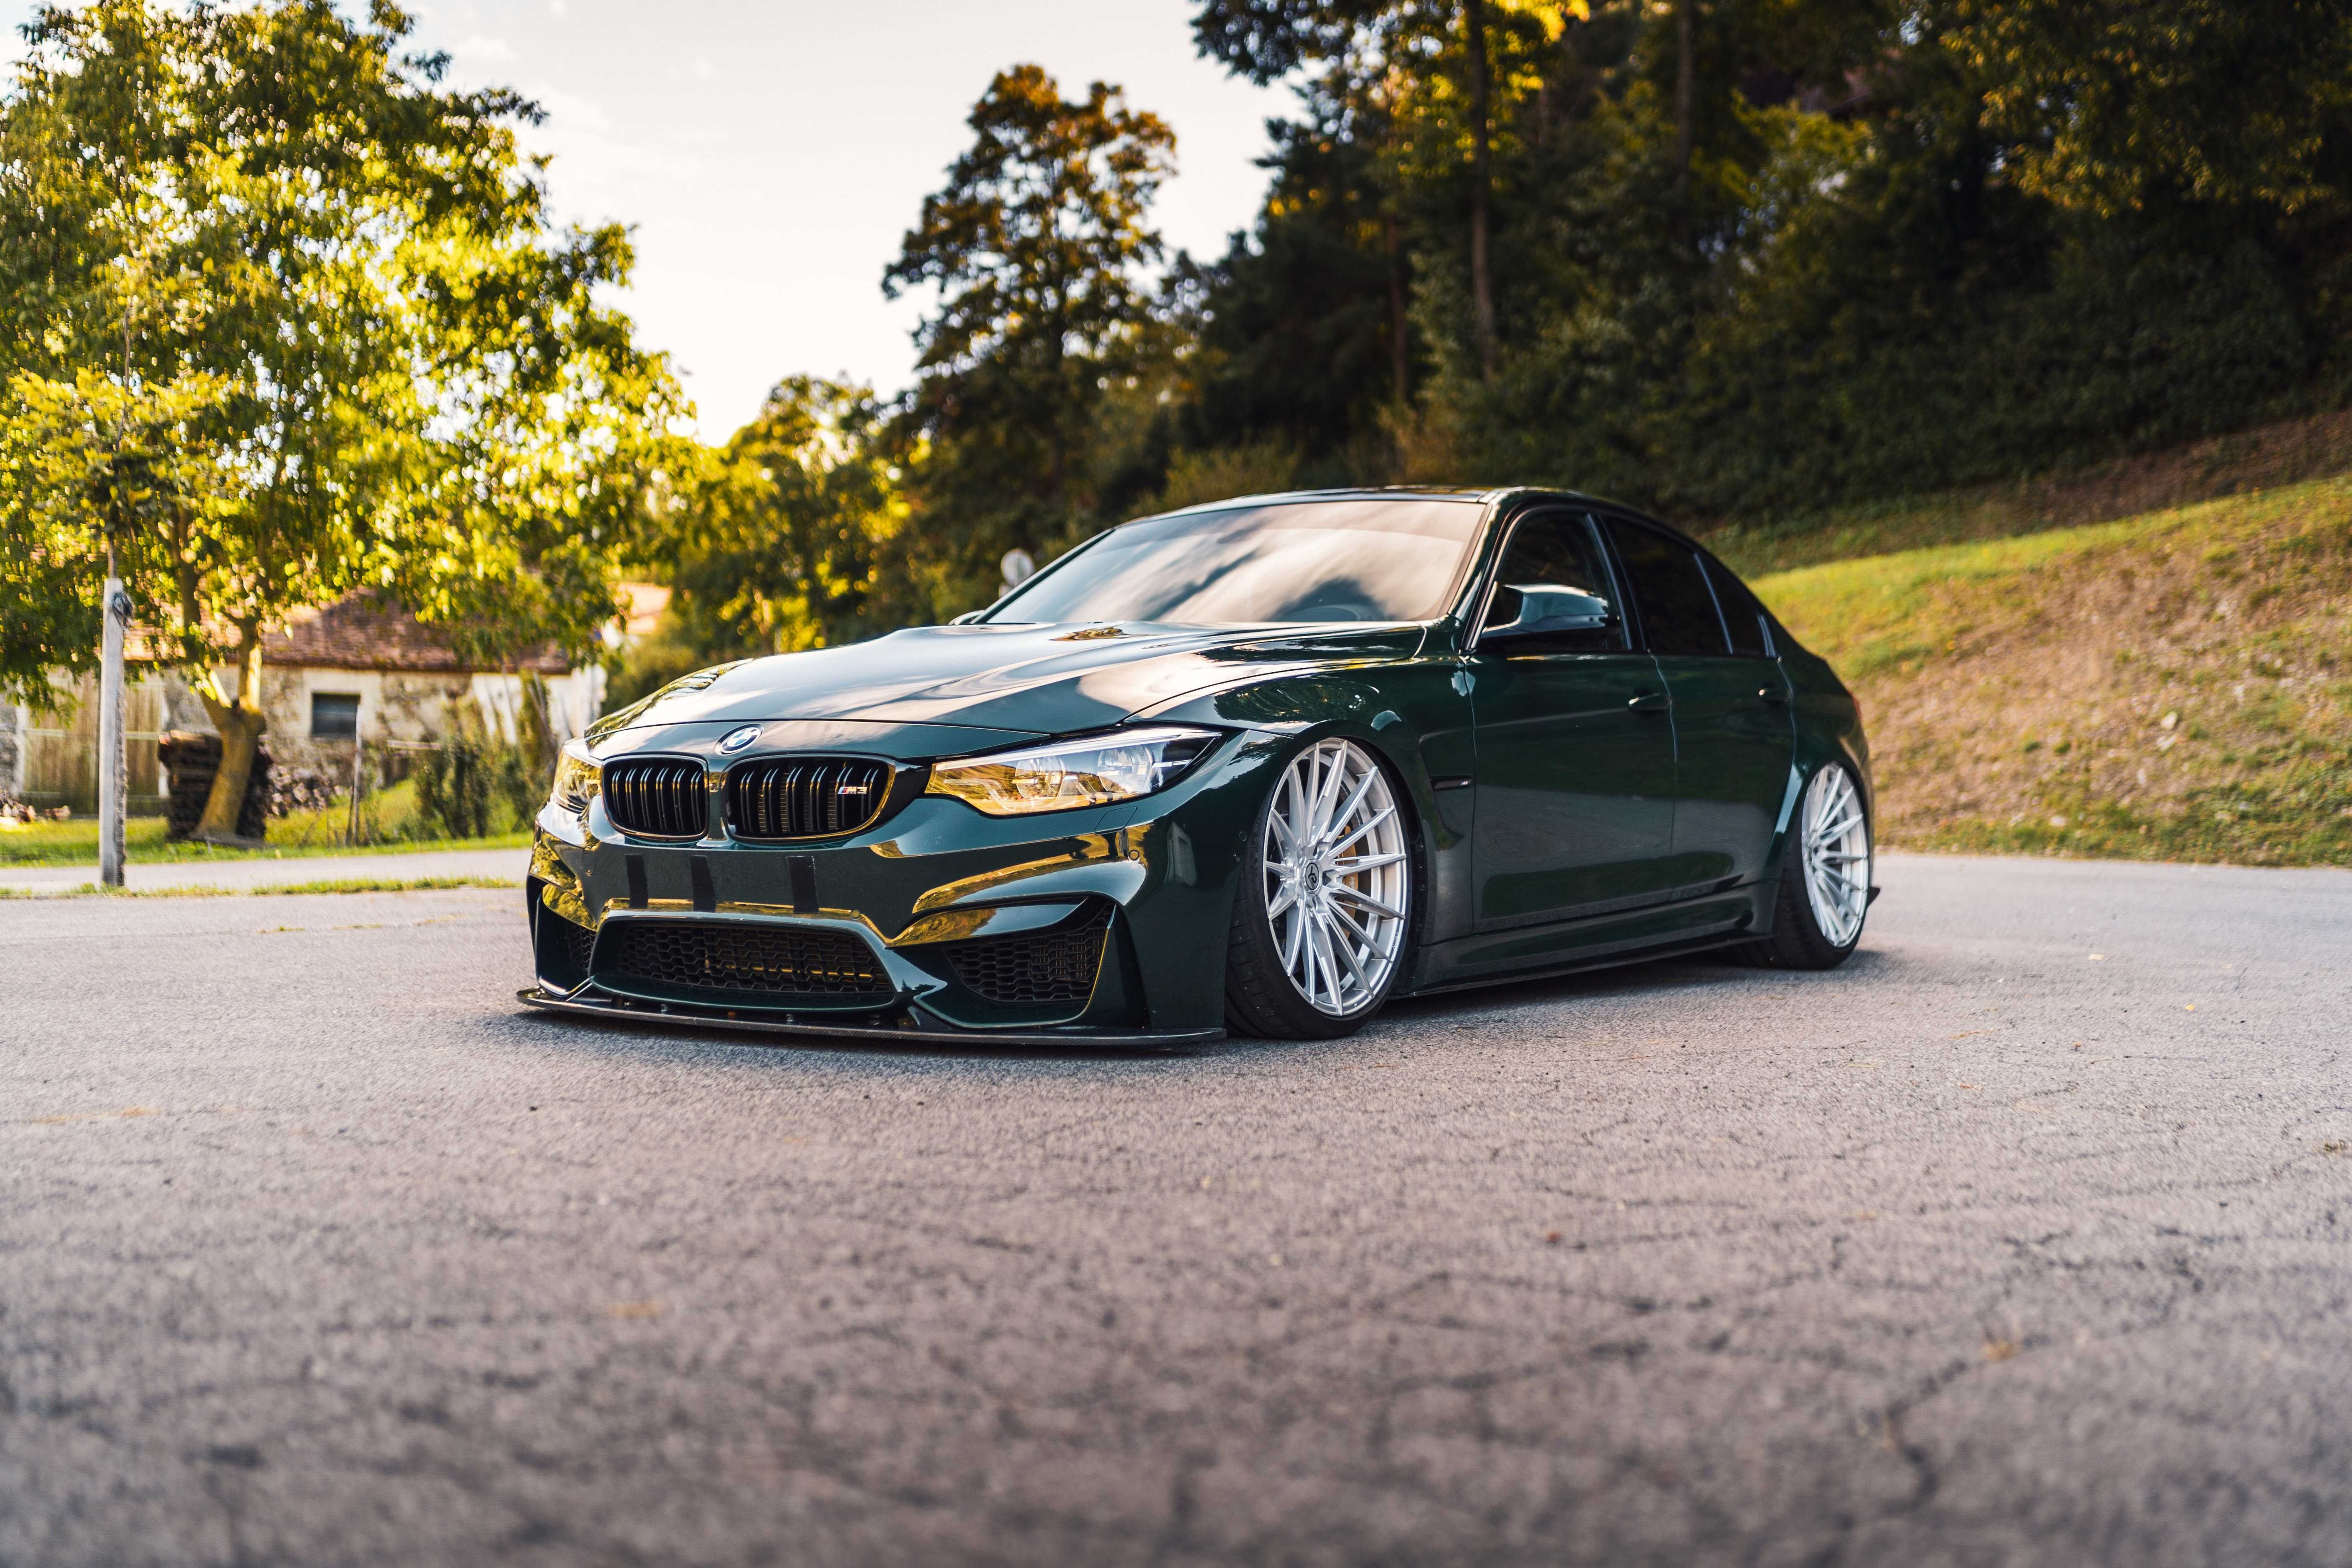 Jante concave forjate YIDO BMW M3 F80